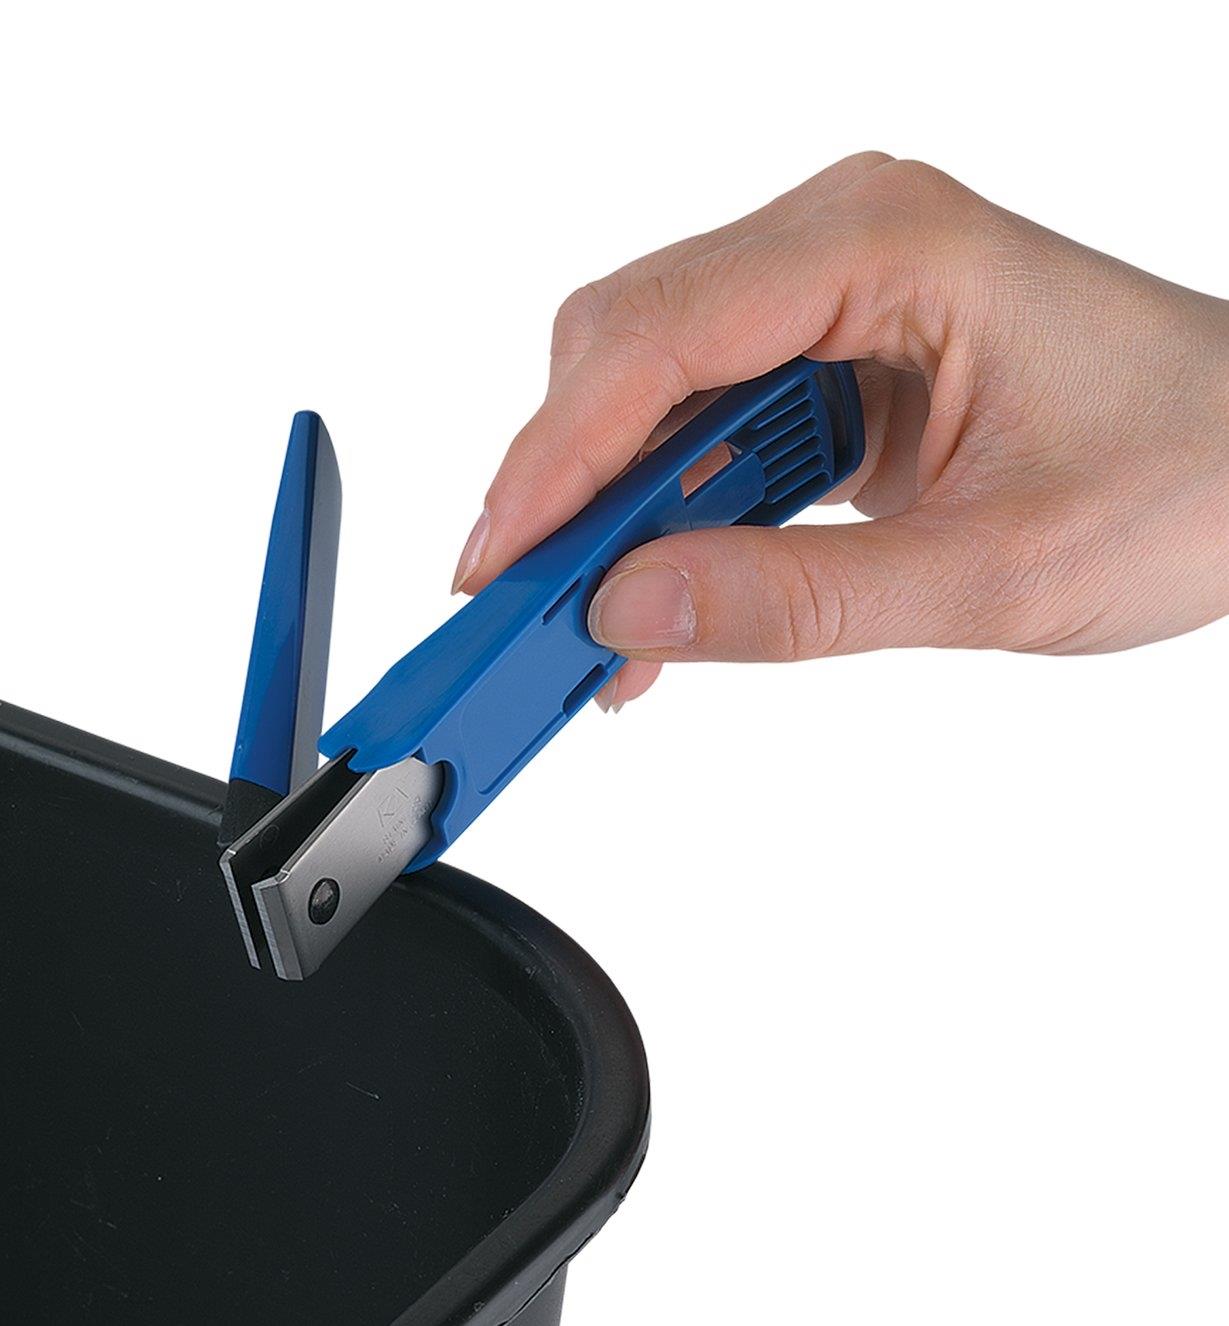 Emptying the Toenail Clipper by tapping it on the side of a trashcan